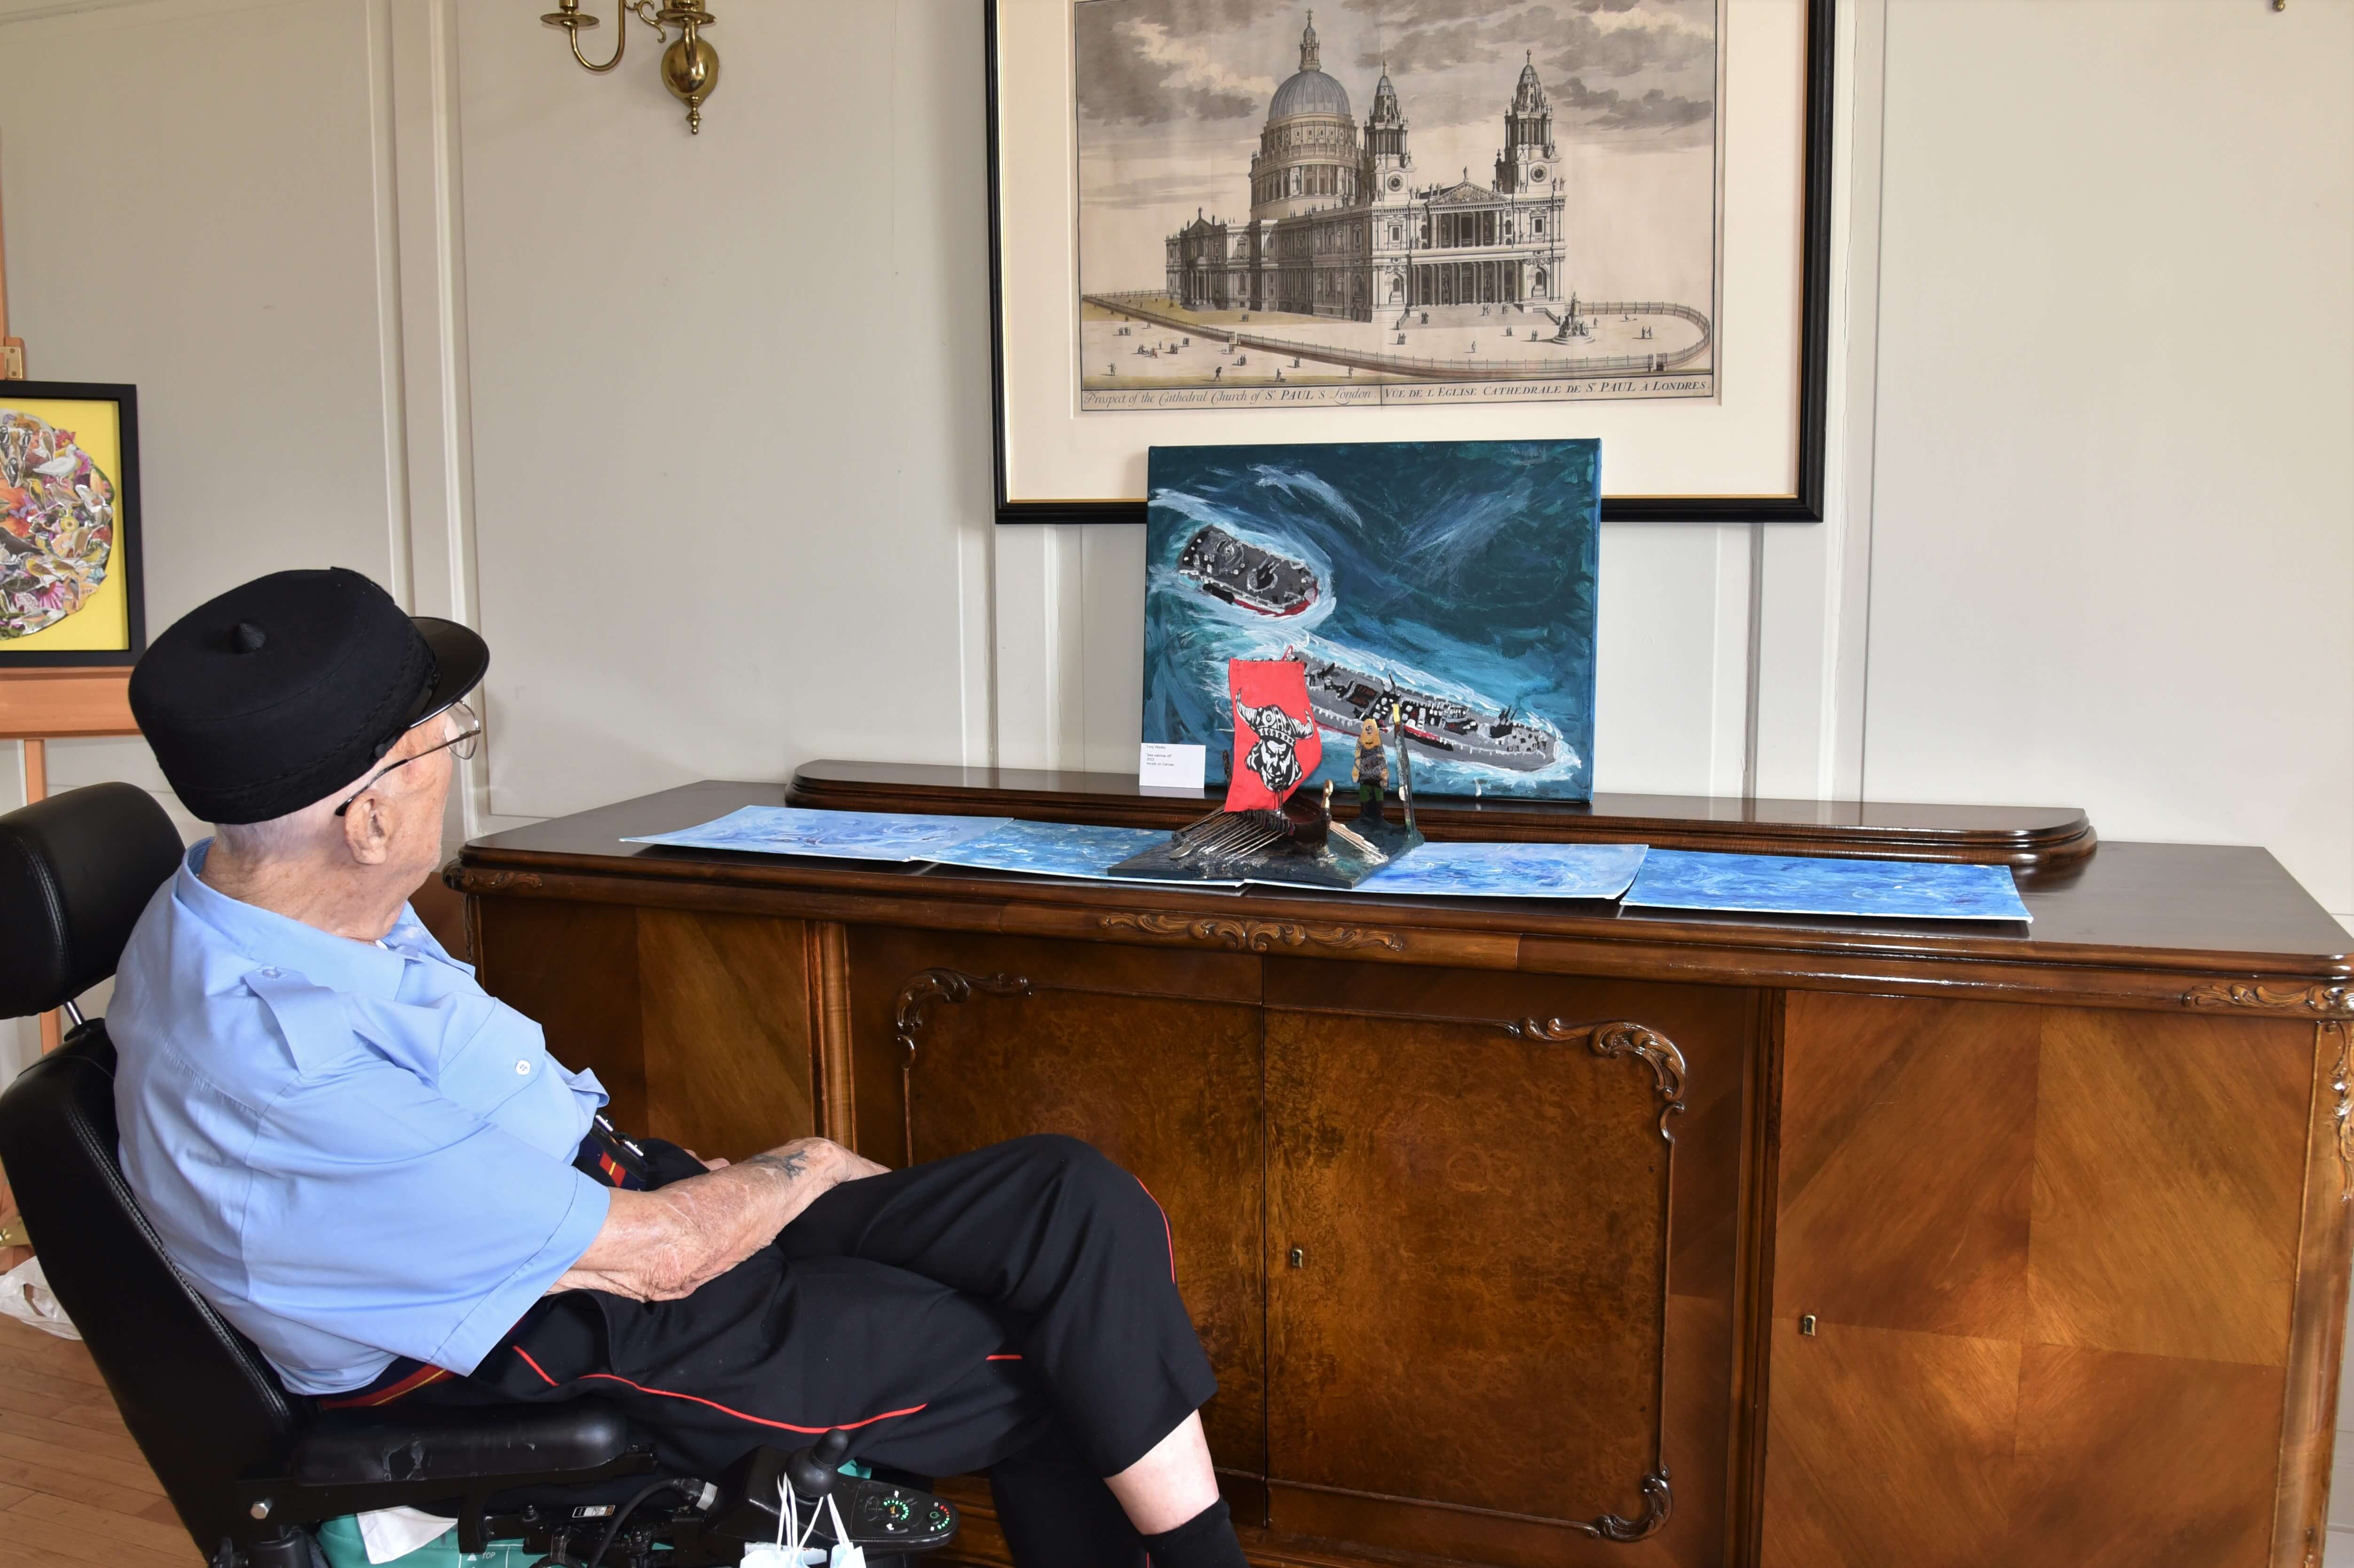 Tony Wadey made this wonderful model of a Viking longboat, displayed alongside his painting of battleships. (Ron Bicheno pictured viewing the artwork)